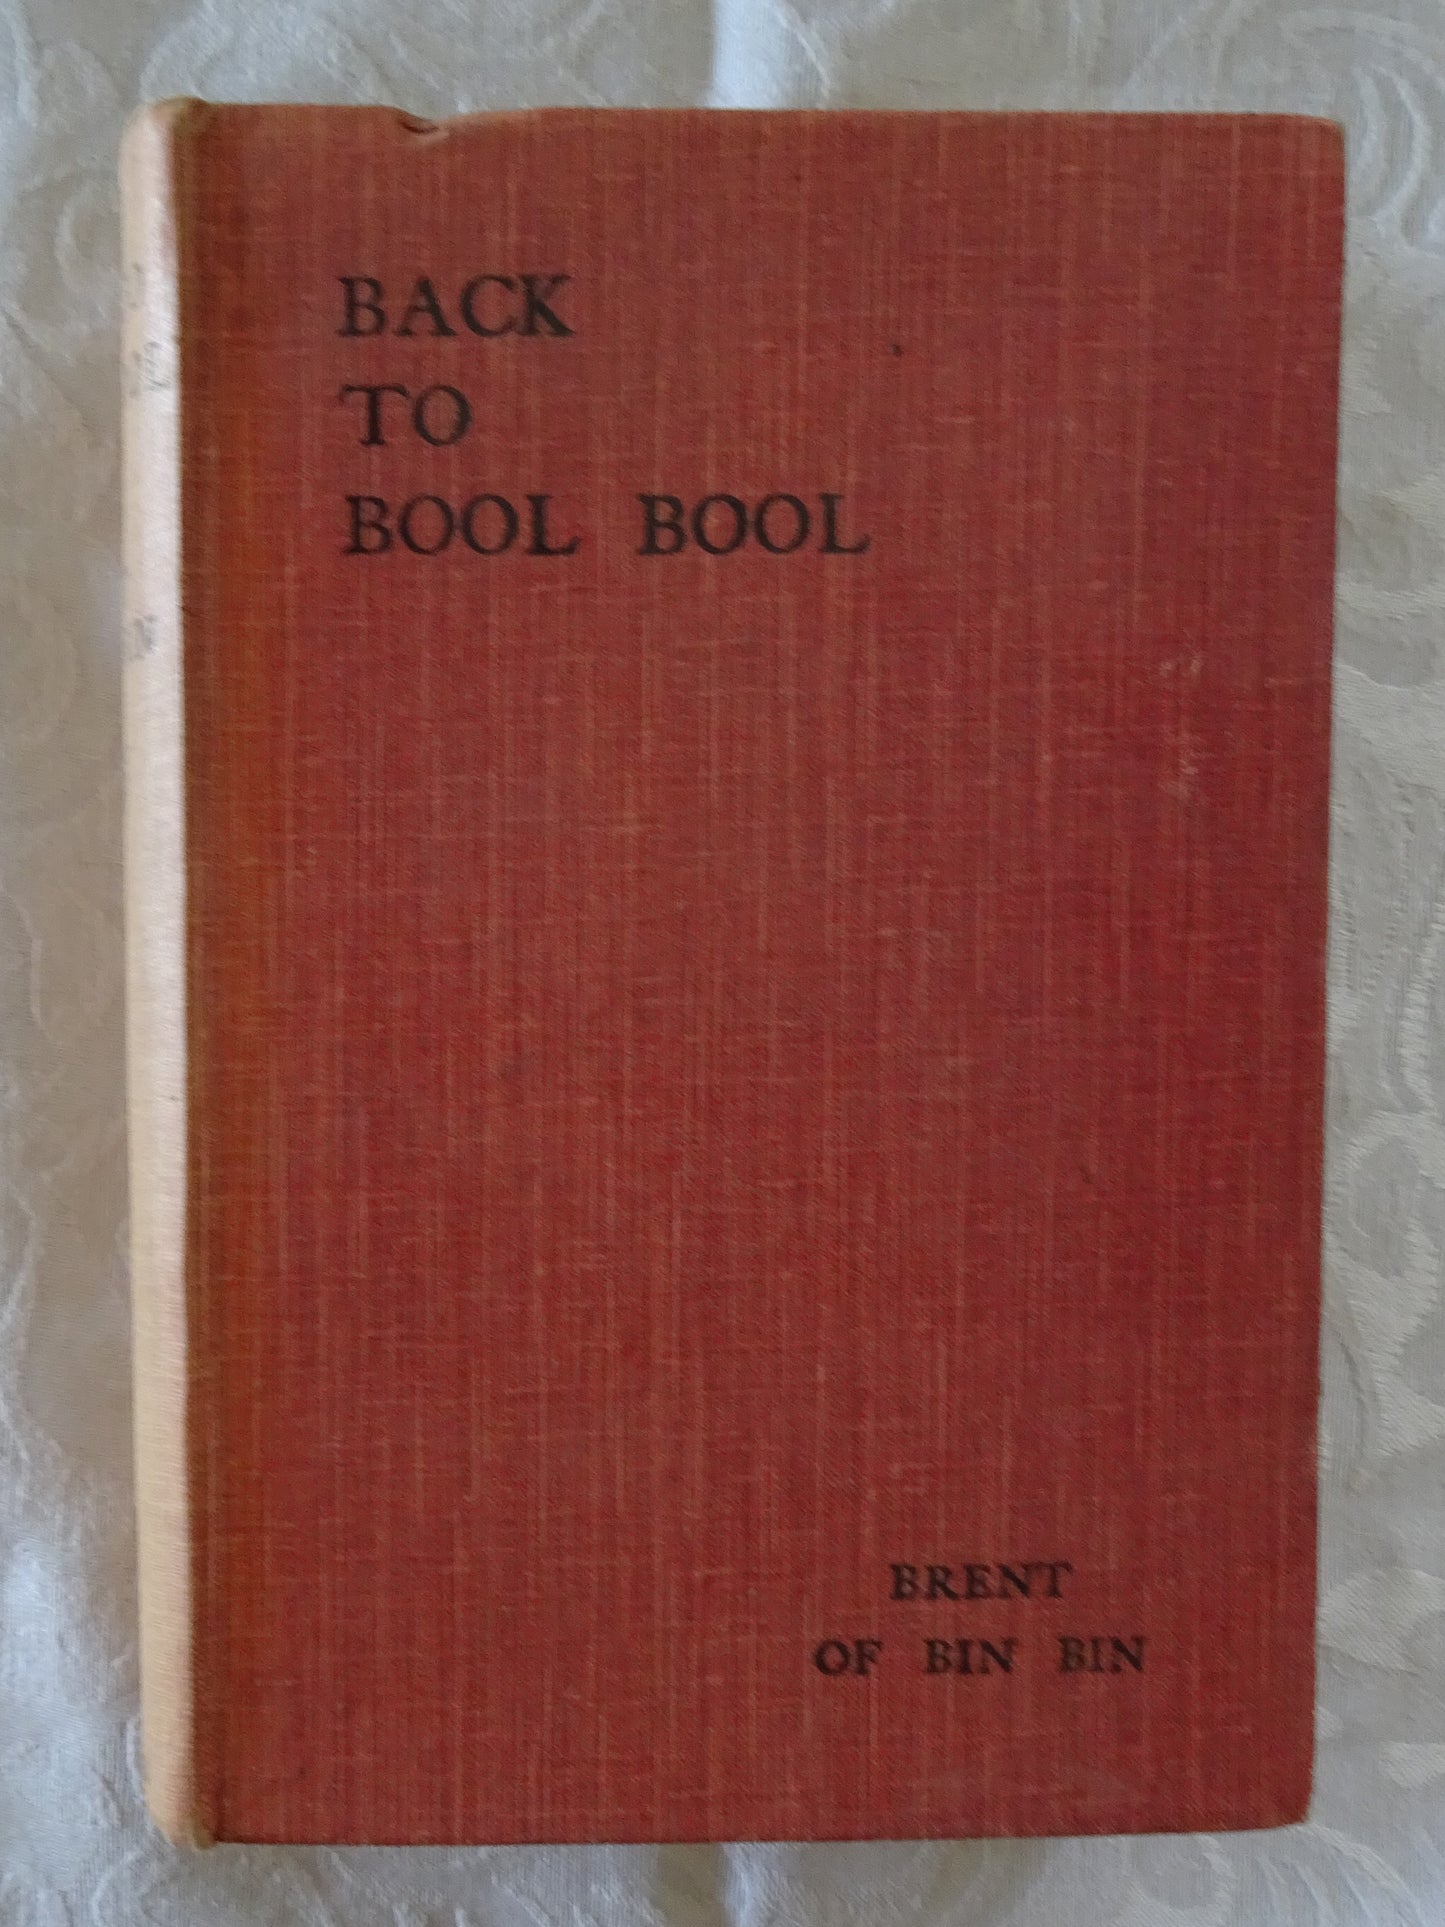 Back To Bool Bool  A Ramiparous Novel with Several Prominant Characters and a Hantle of Others disposed as the Atolls of Oceania's Archipelagoes  by Brent of Bin Bin (Miles Franklin)